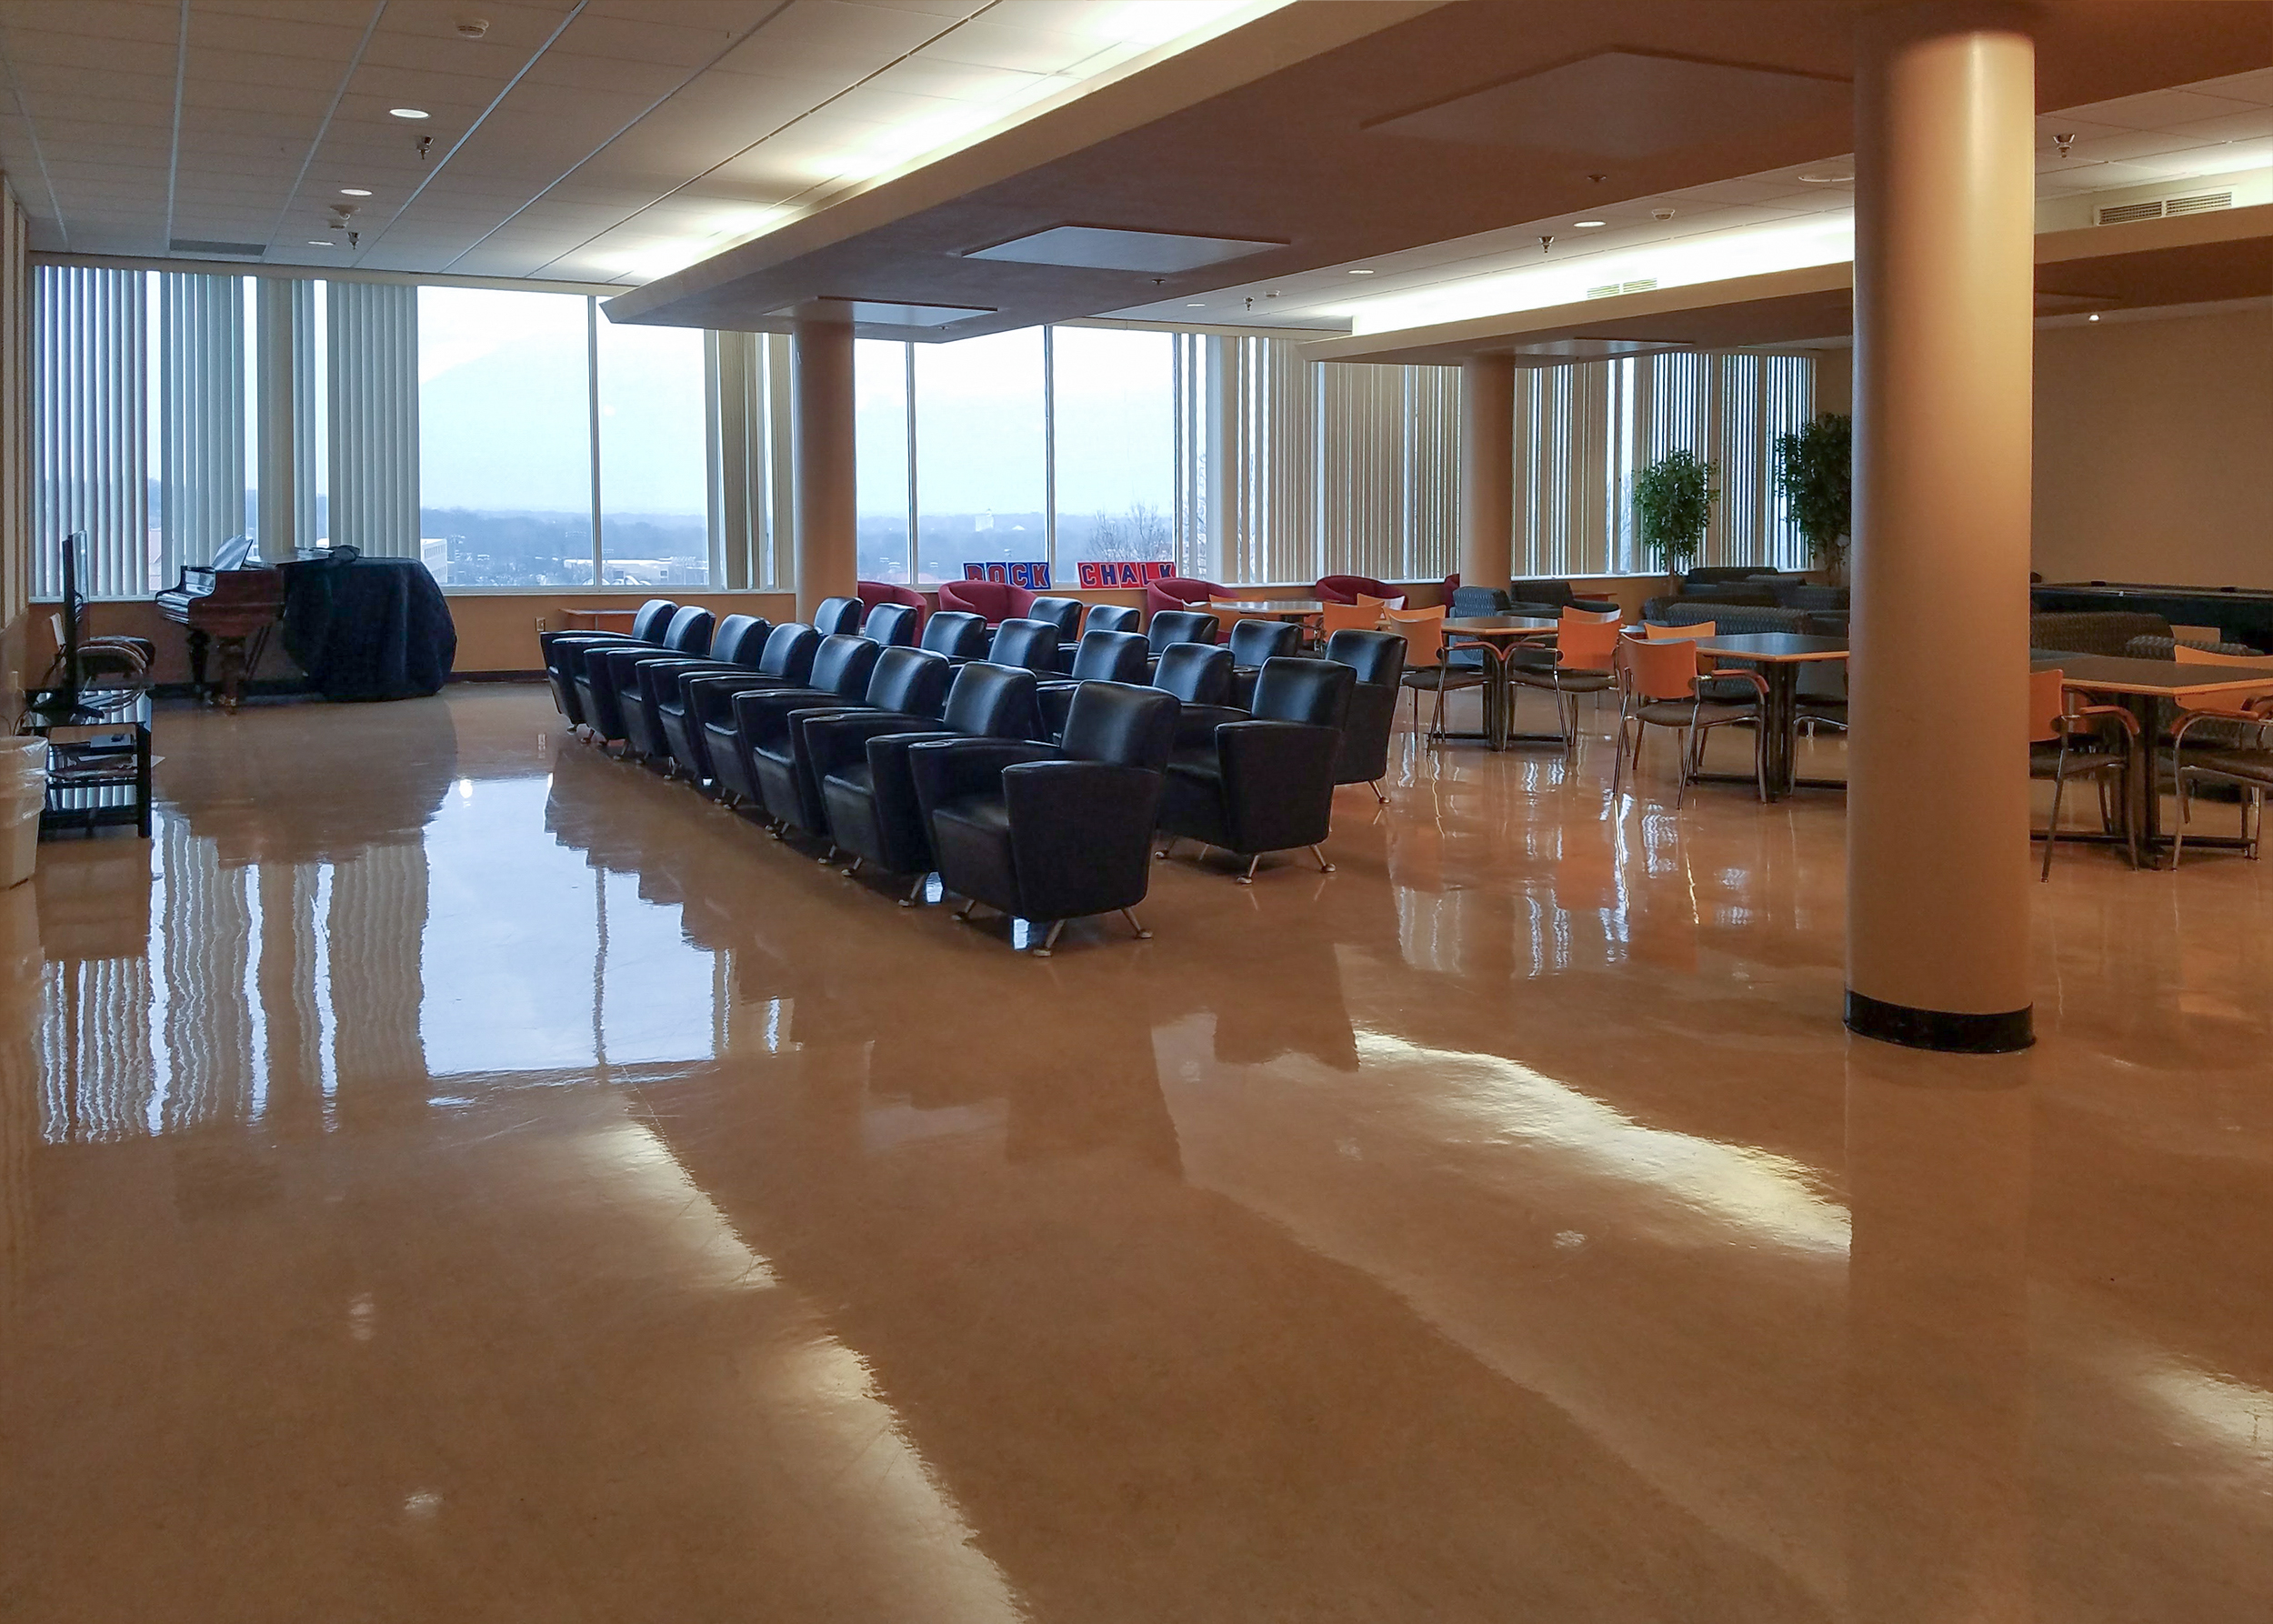 Rows of padded chairs on a polished floor and floor to ceiling windows along the back wall in the Ellsworth Living Room.